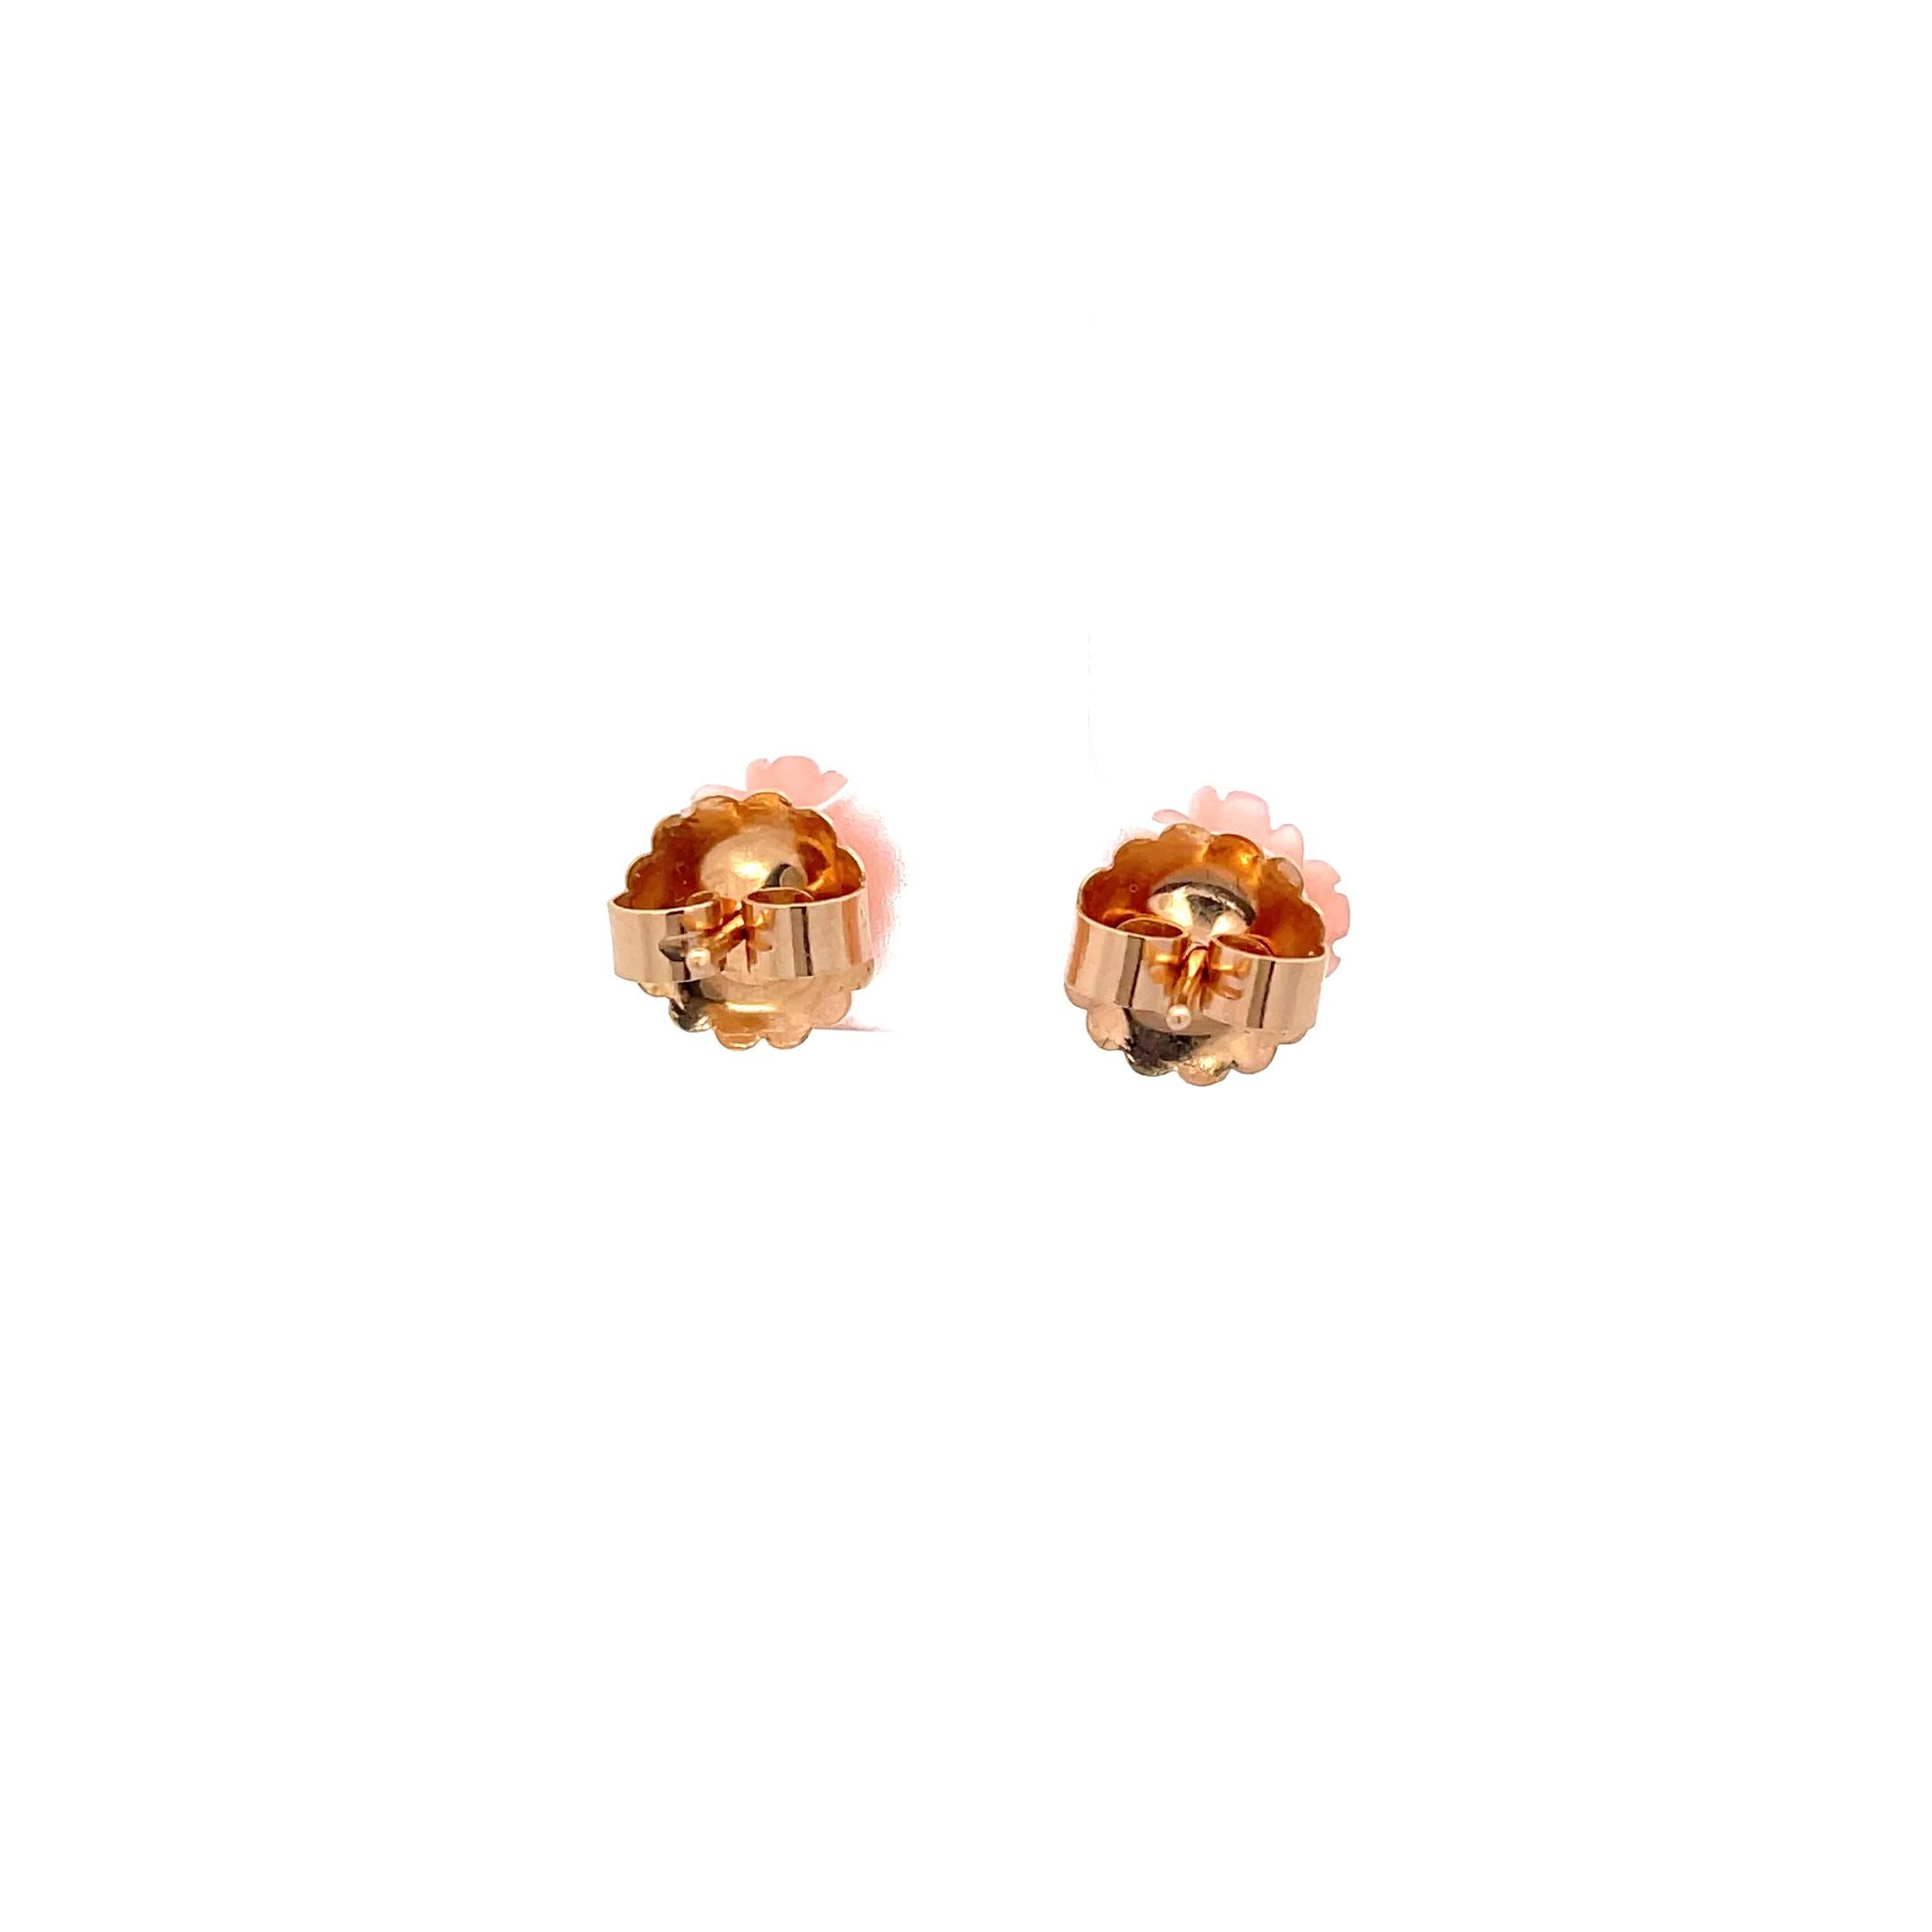 Contemporary Irene Neuwirth Pink Opal Akoya Pearl Earrings 18k Rose Gold For Sale